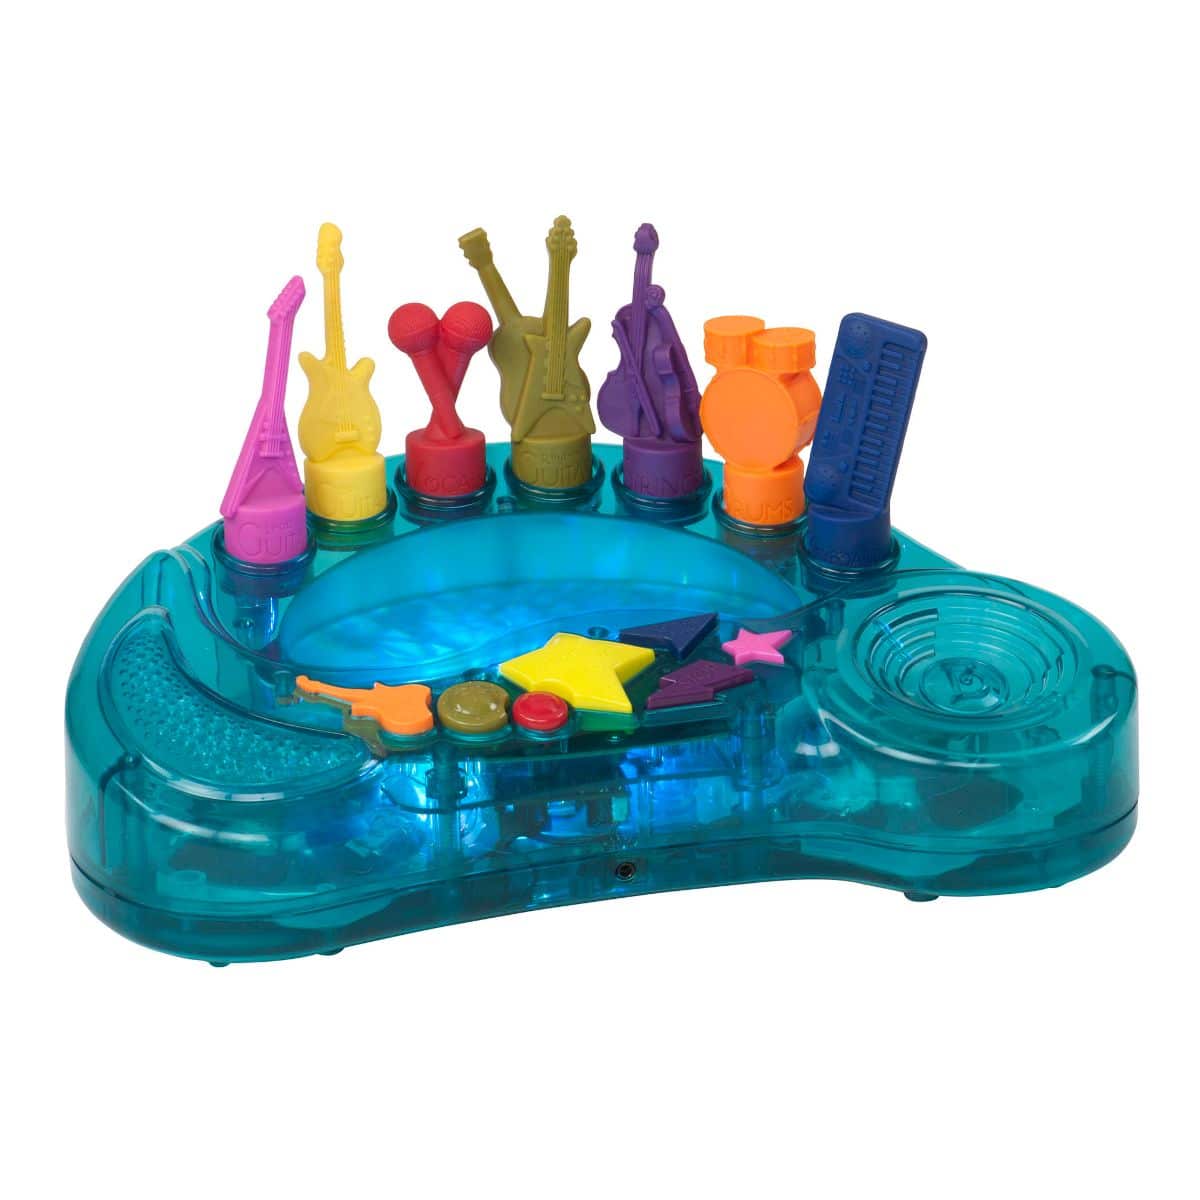 Interactive toy rock music playset